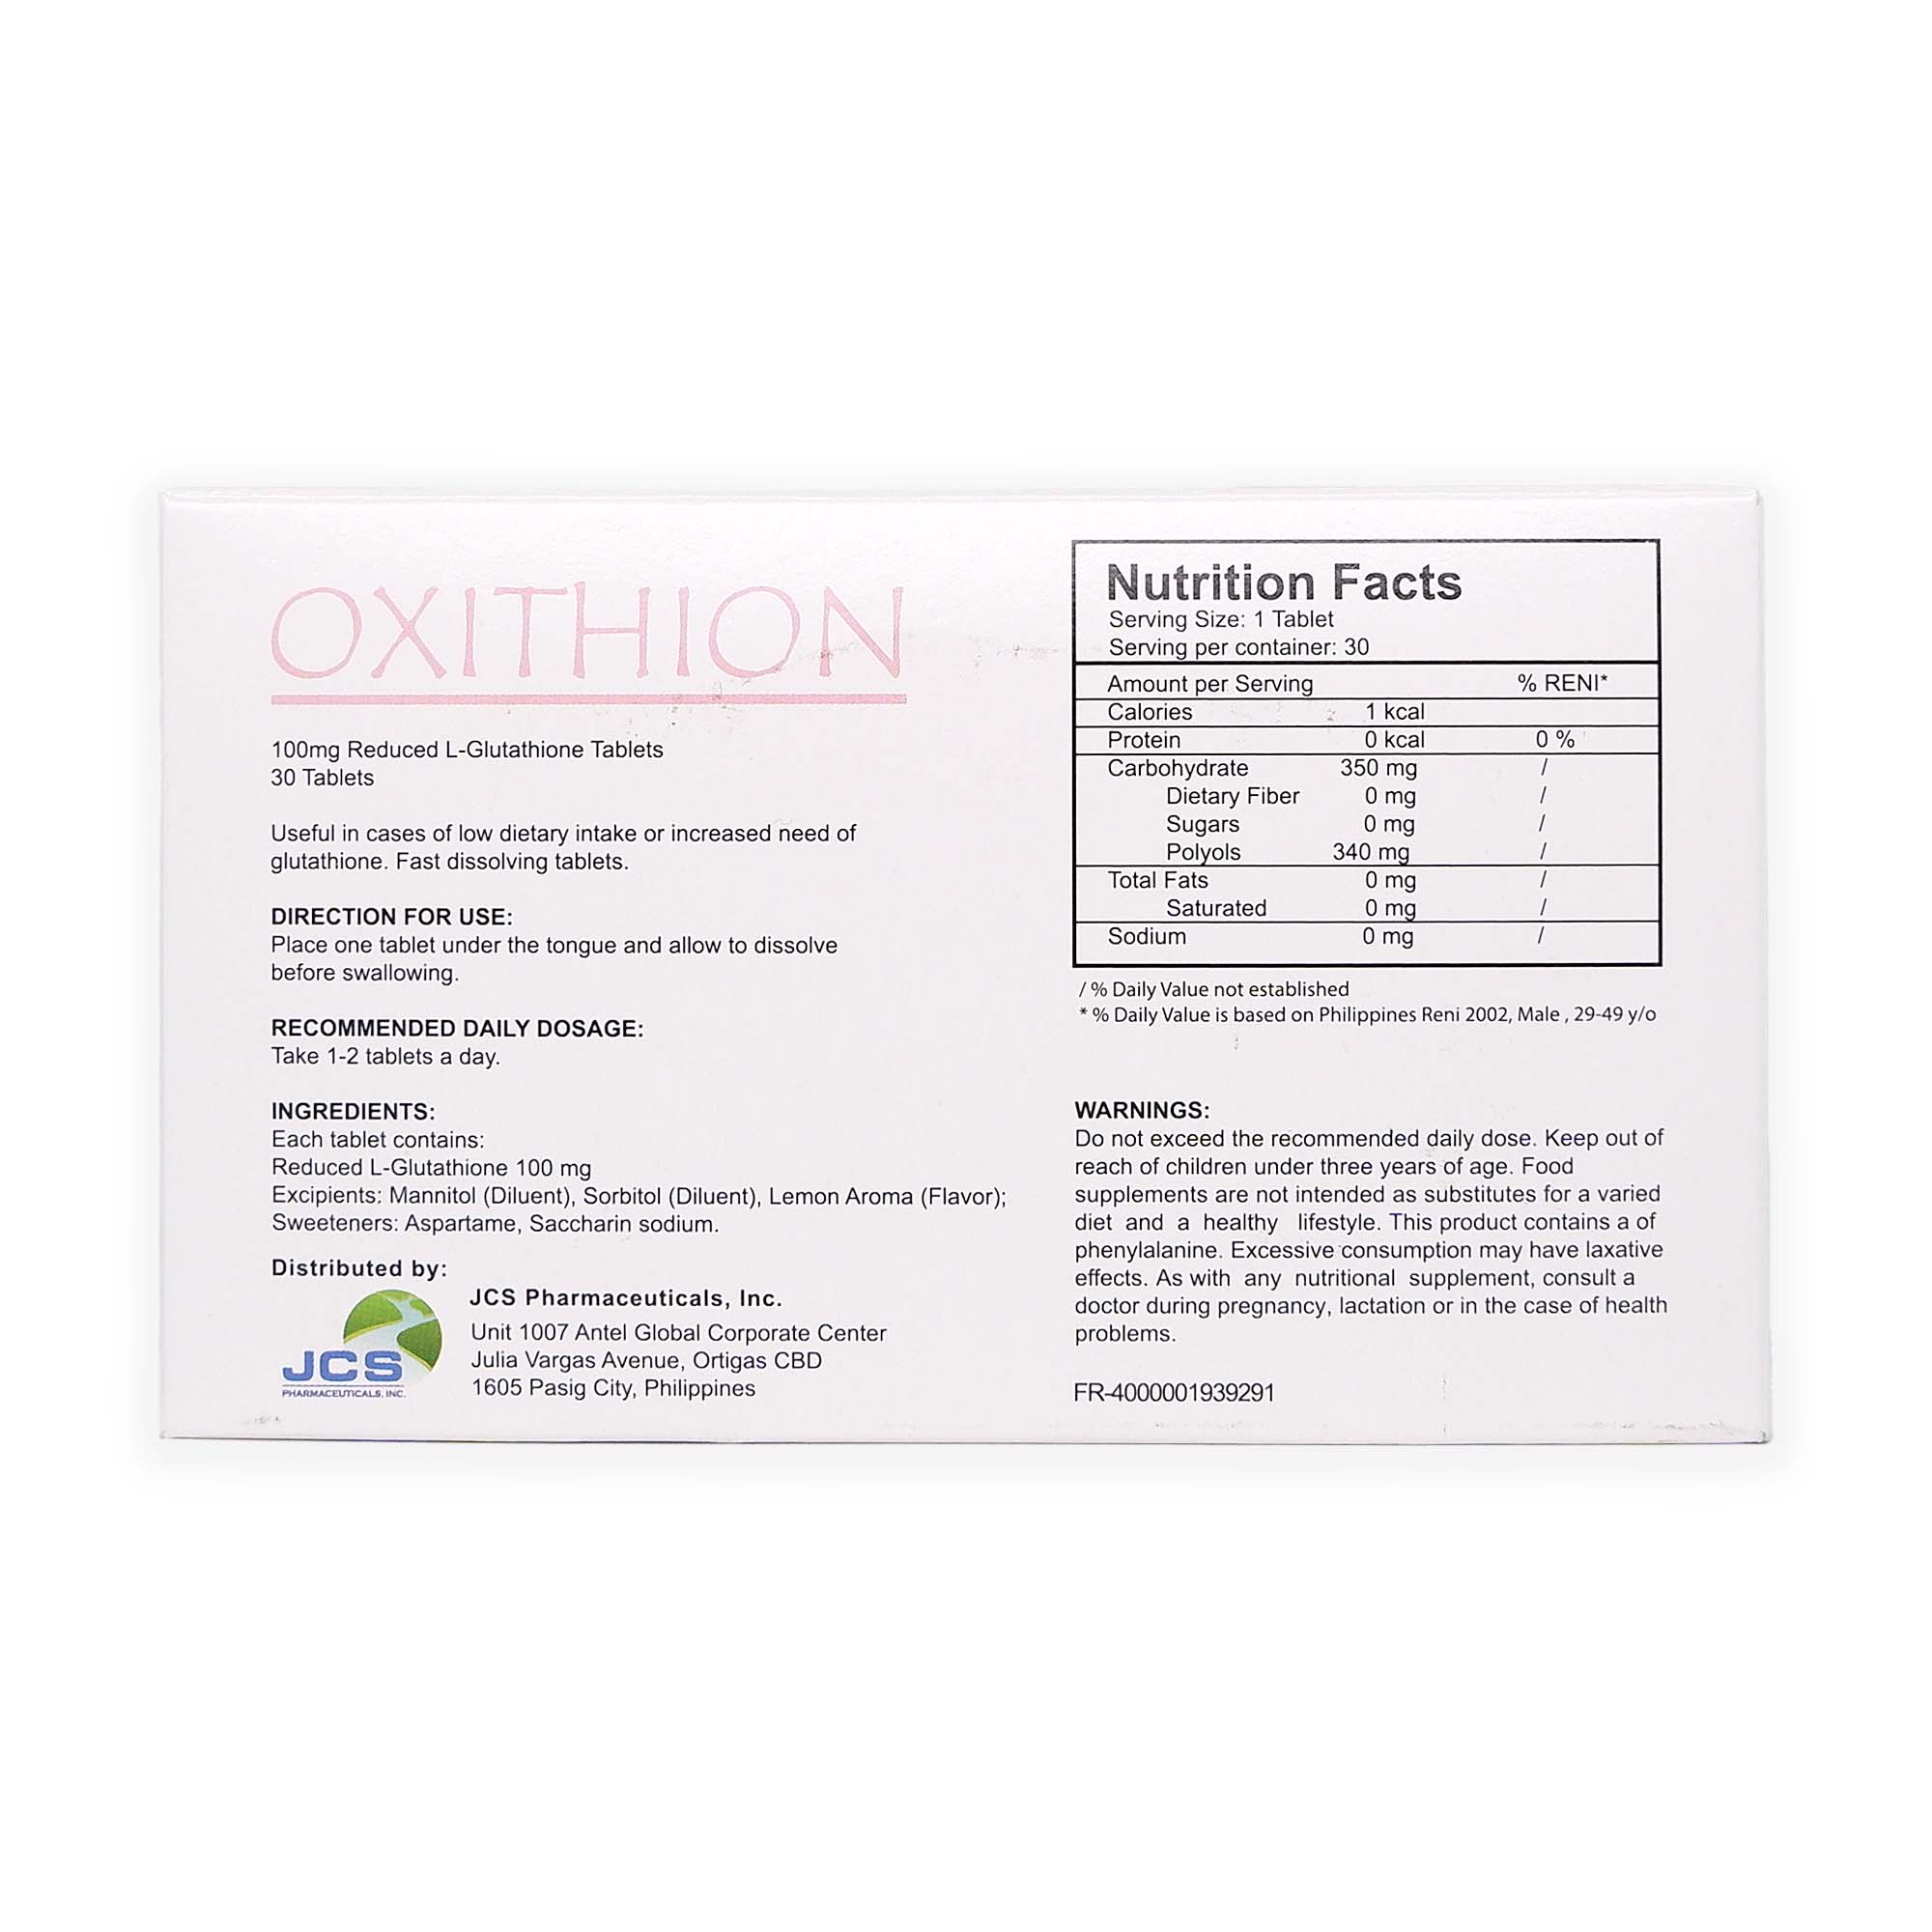 Oxithion 30 Tablets